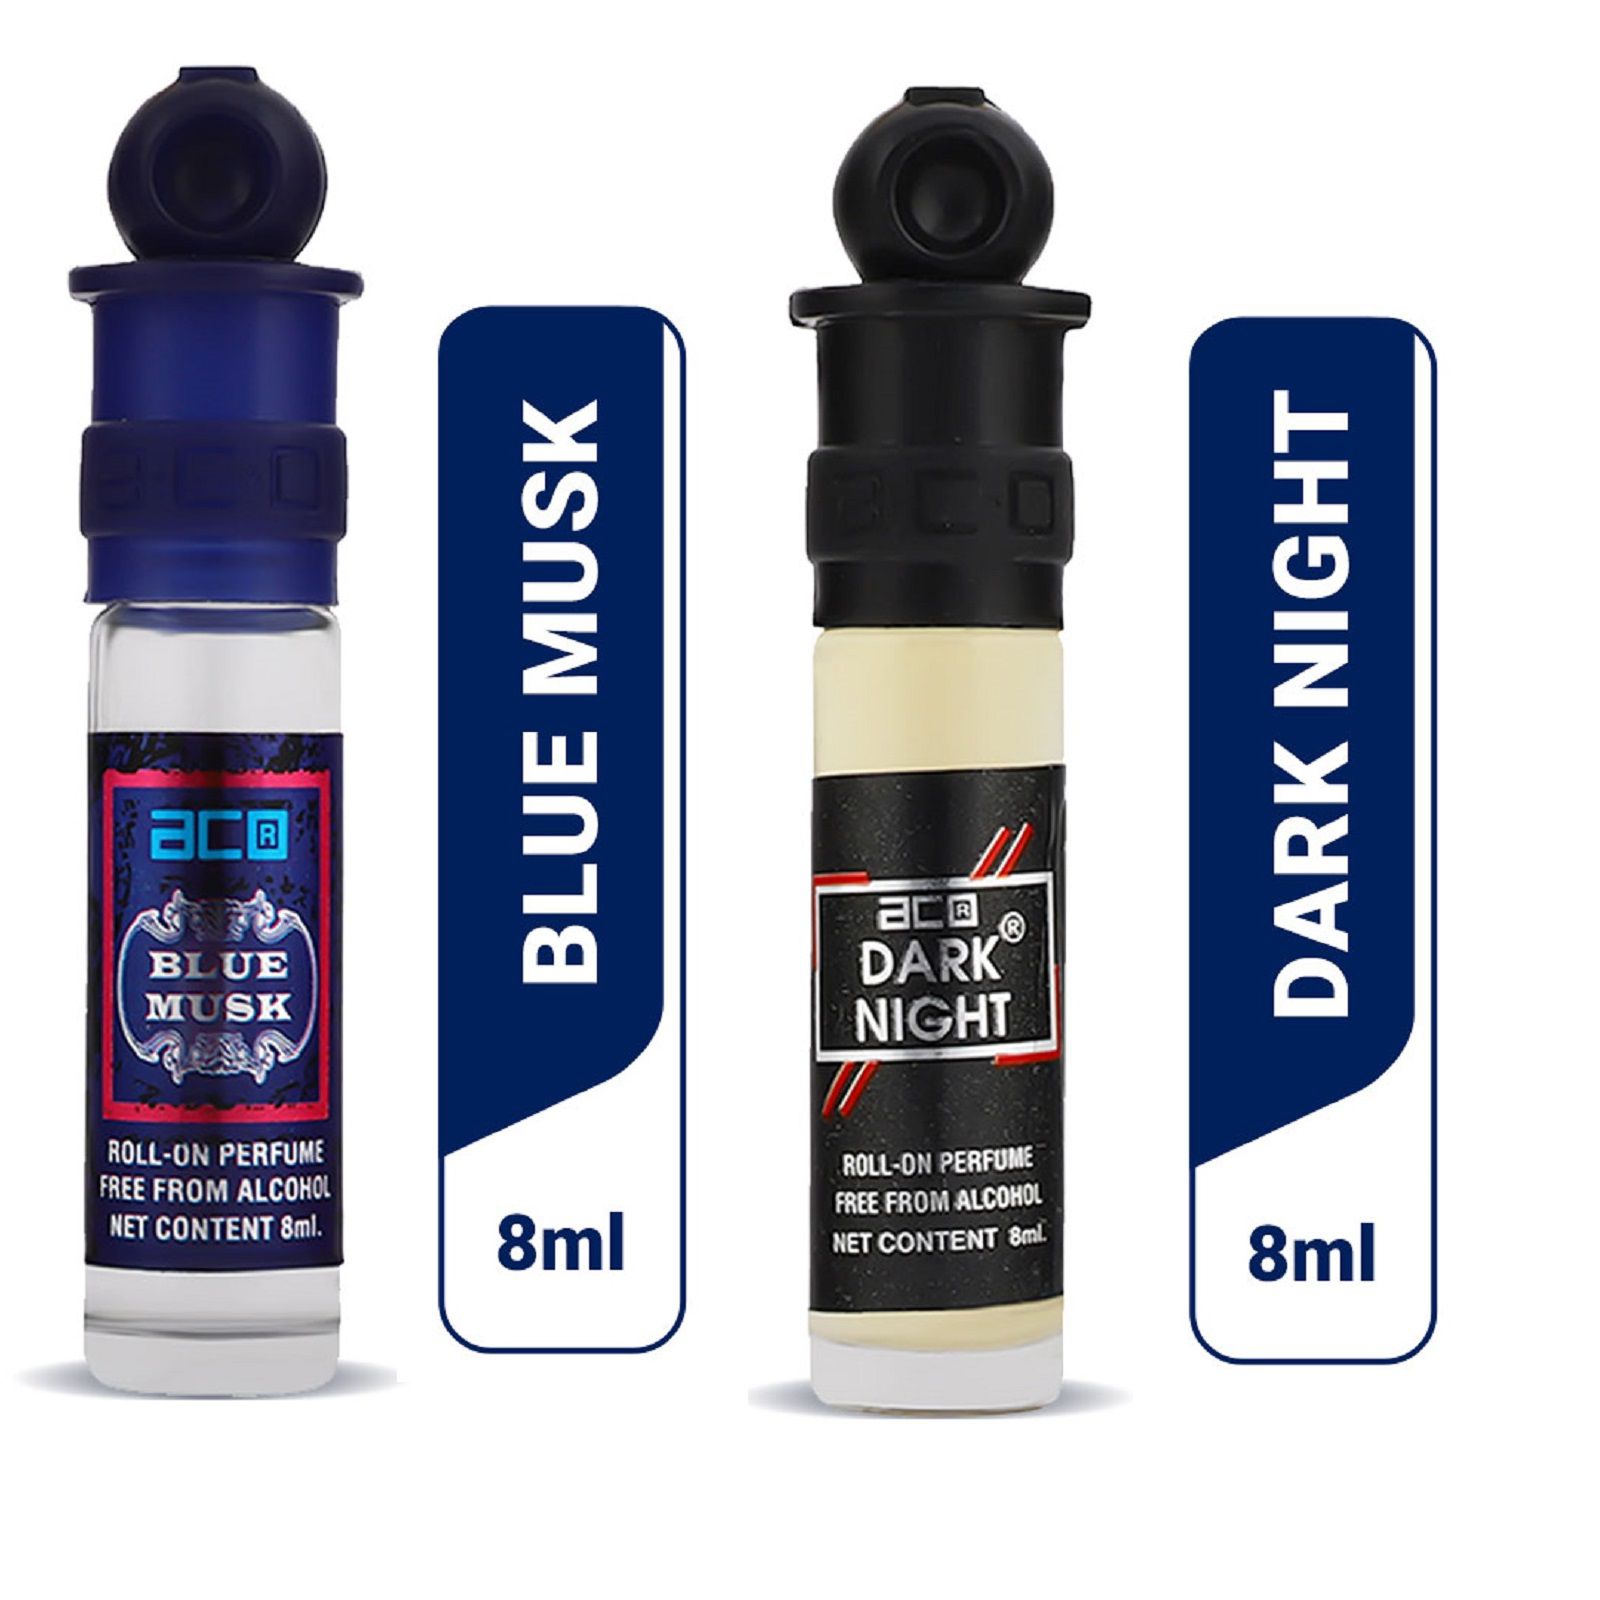     			aco perfumes Blue musk & Dark night  in blue Concentrated  Attar Roll On 8ml COMBO SET